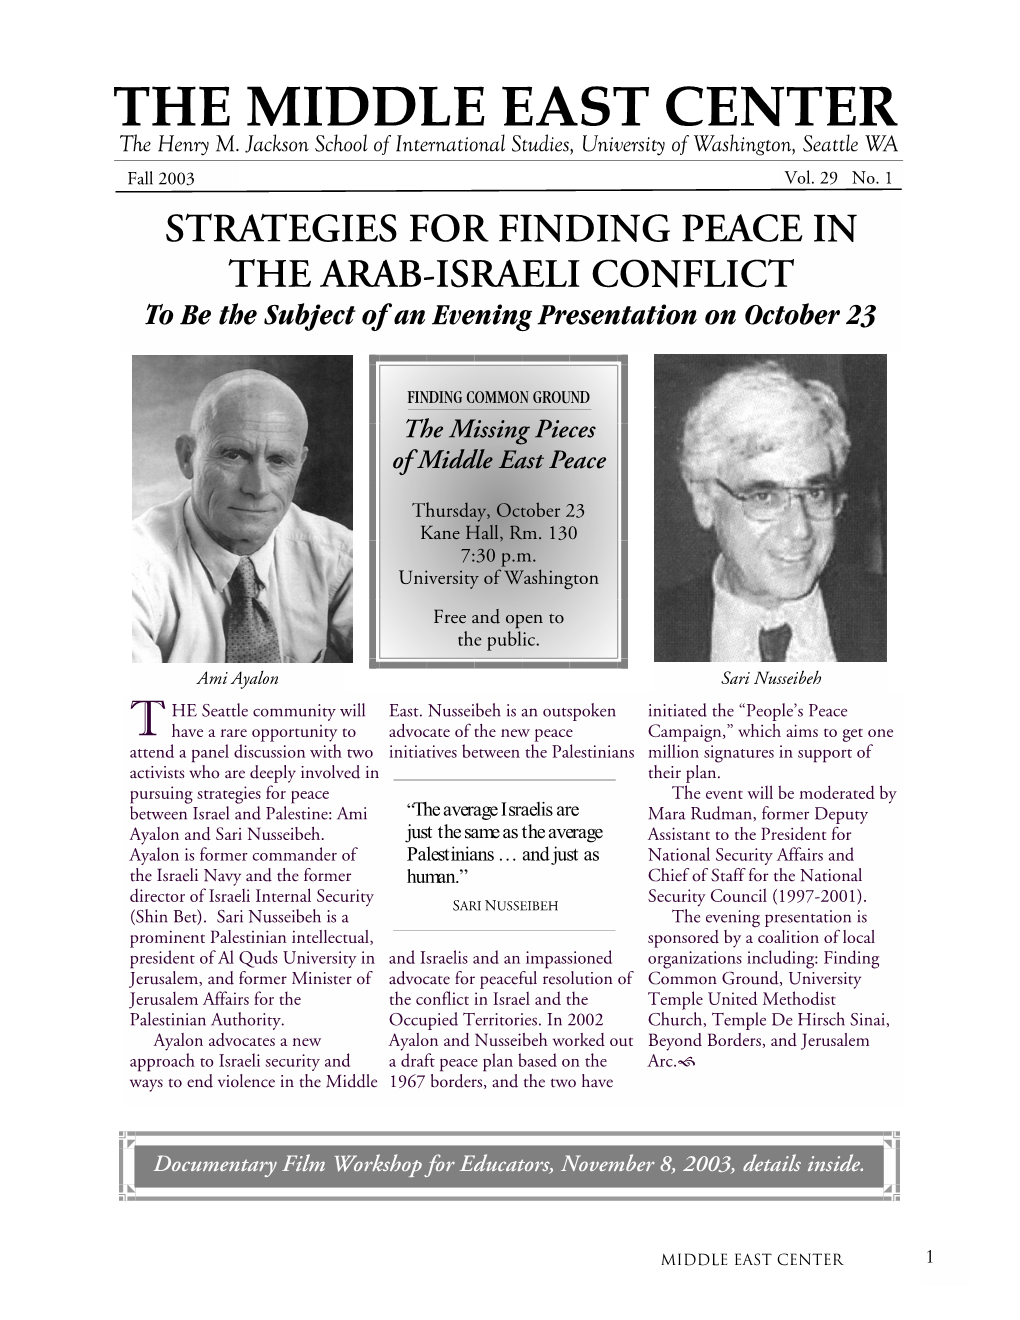 STRATEGIES for FINDING PEACE in the ARAB-ISRAELI CONFLICT to Be the Subject of an Evening Presentation on October 23